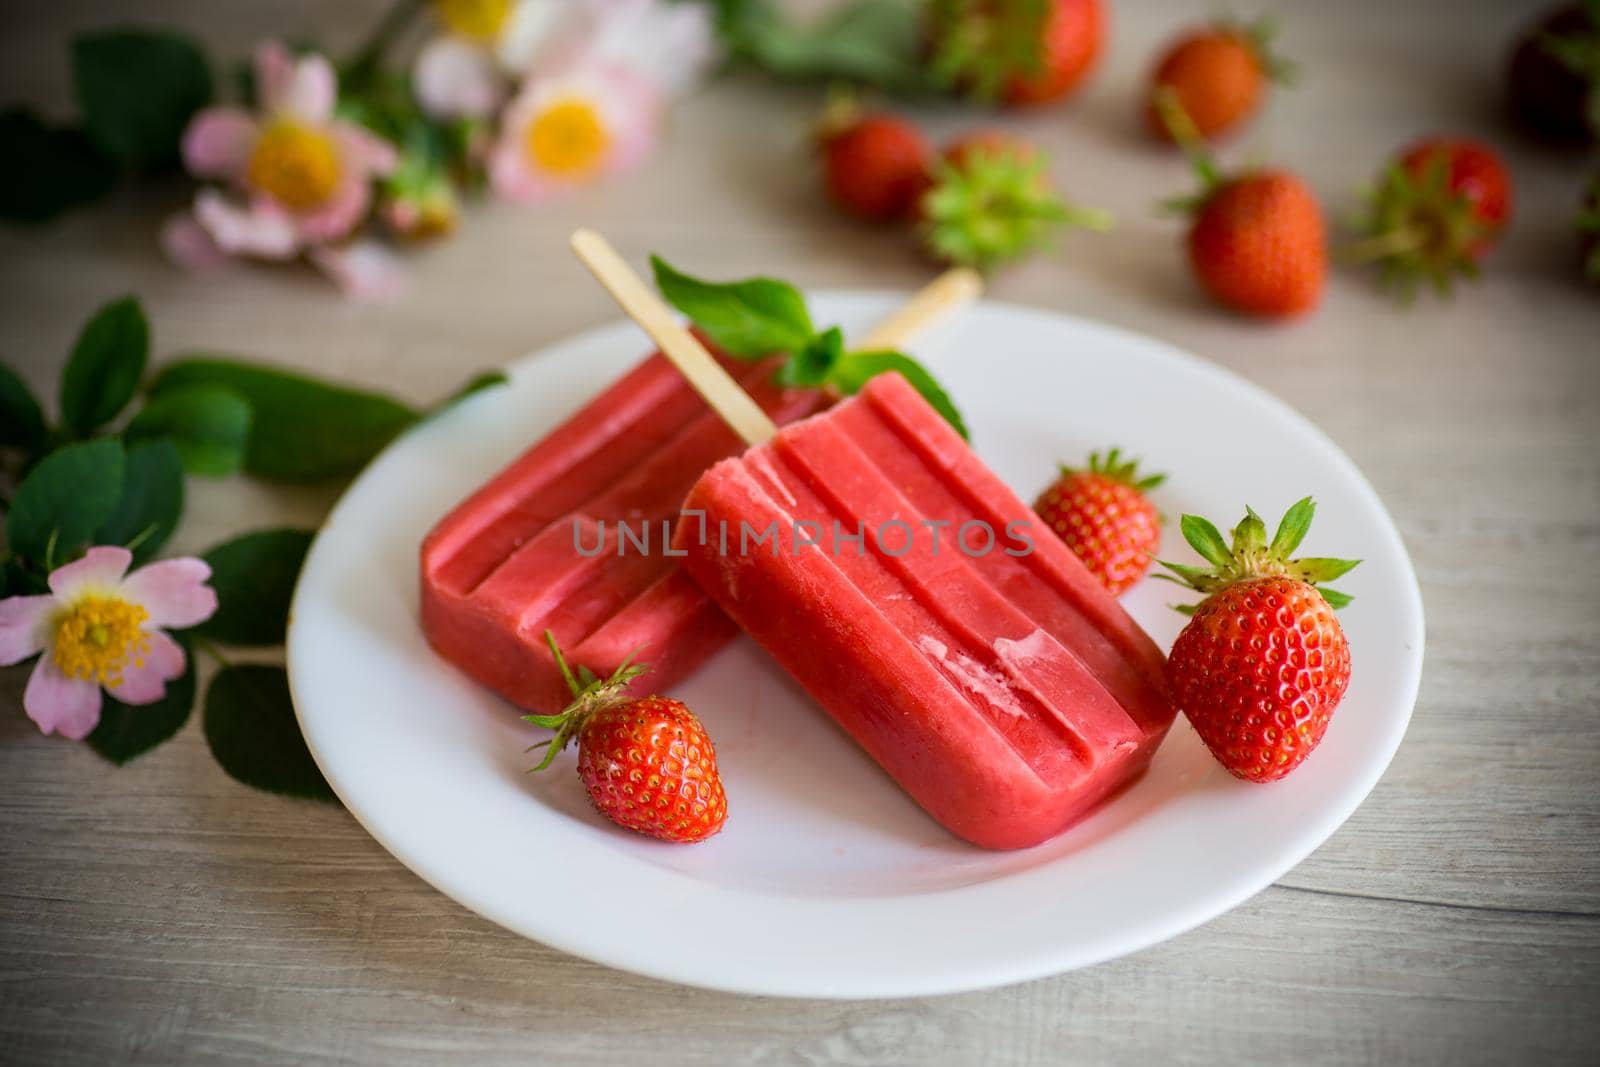 homemade strawberry ice cream on a stick made from fresh strawberries in a plate by Rawlik